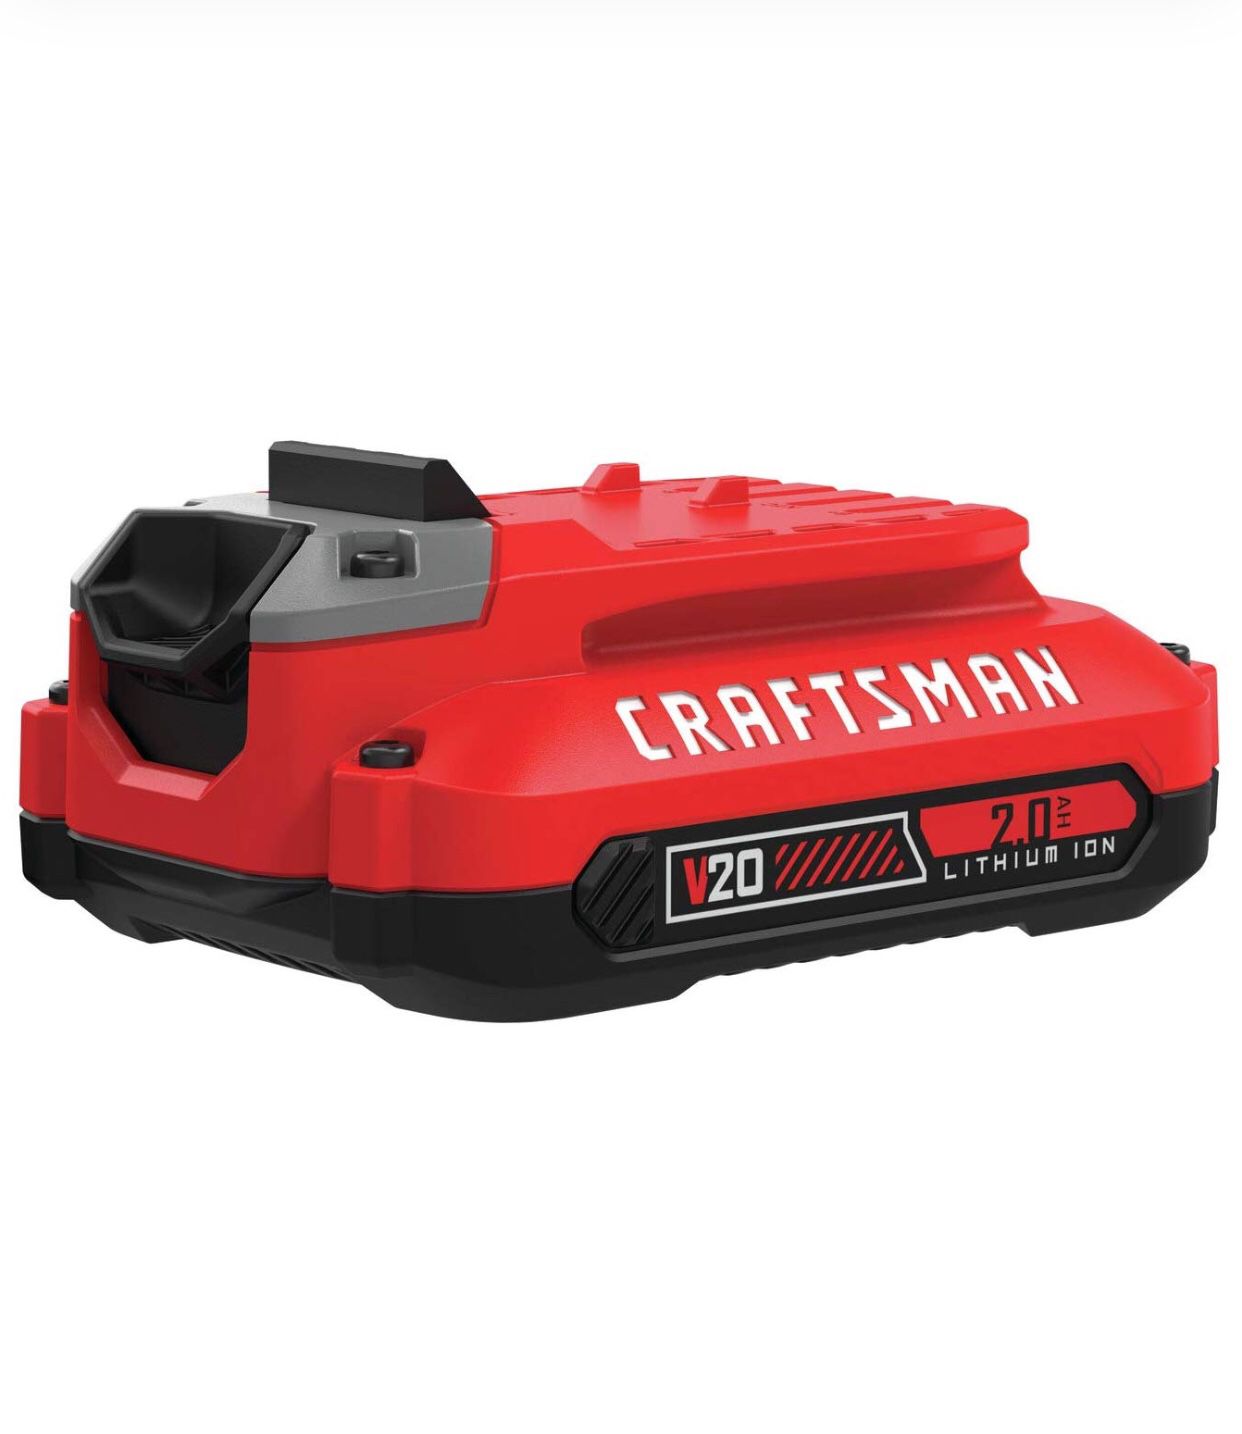 CRAFTSMAN 20V MAX Lithium Ion Battery, 2.0-Amp Hour